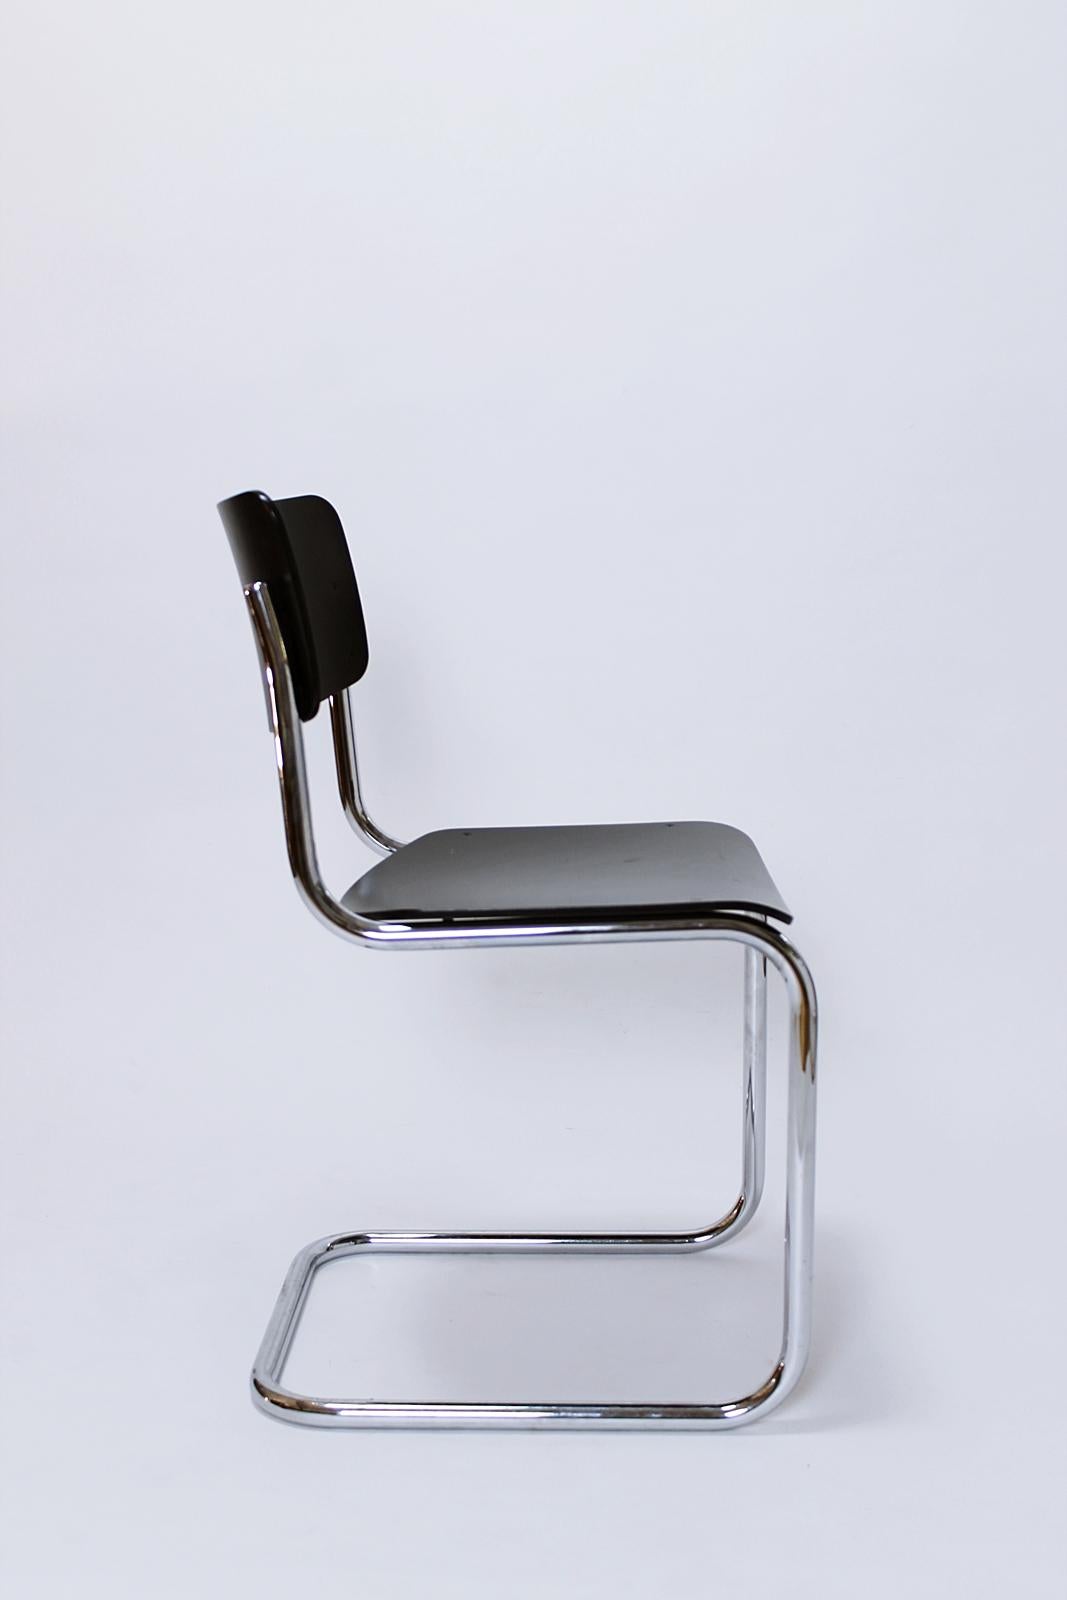 Bauhaus Classic S43 Cantilevered Chair by Mart Stam for Thonet, Germany For Sale 2